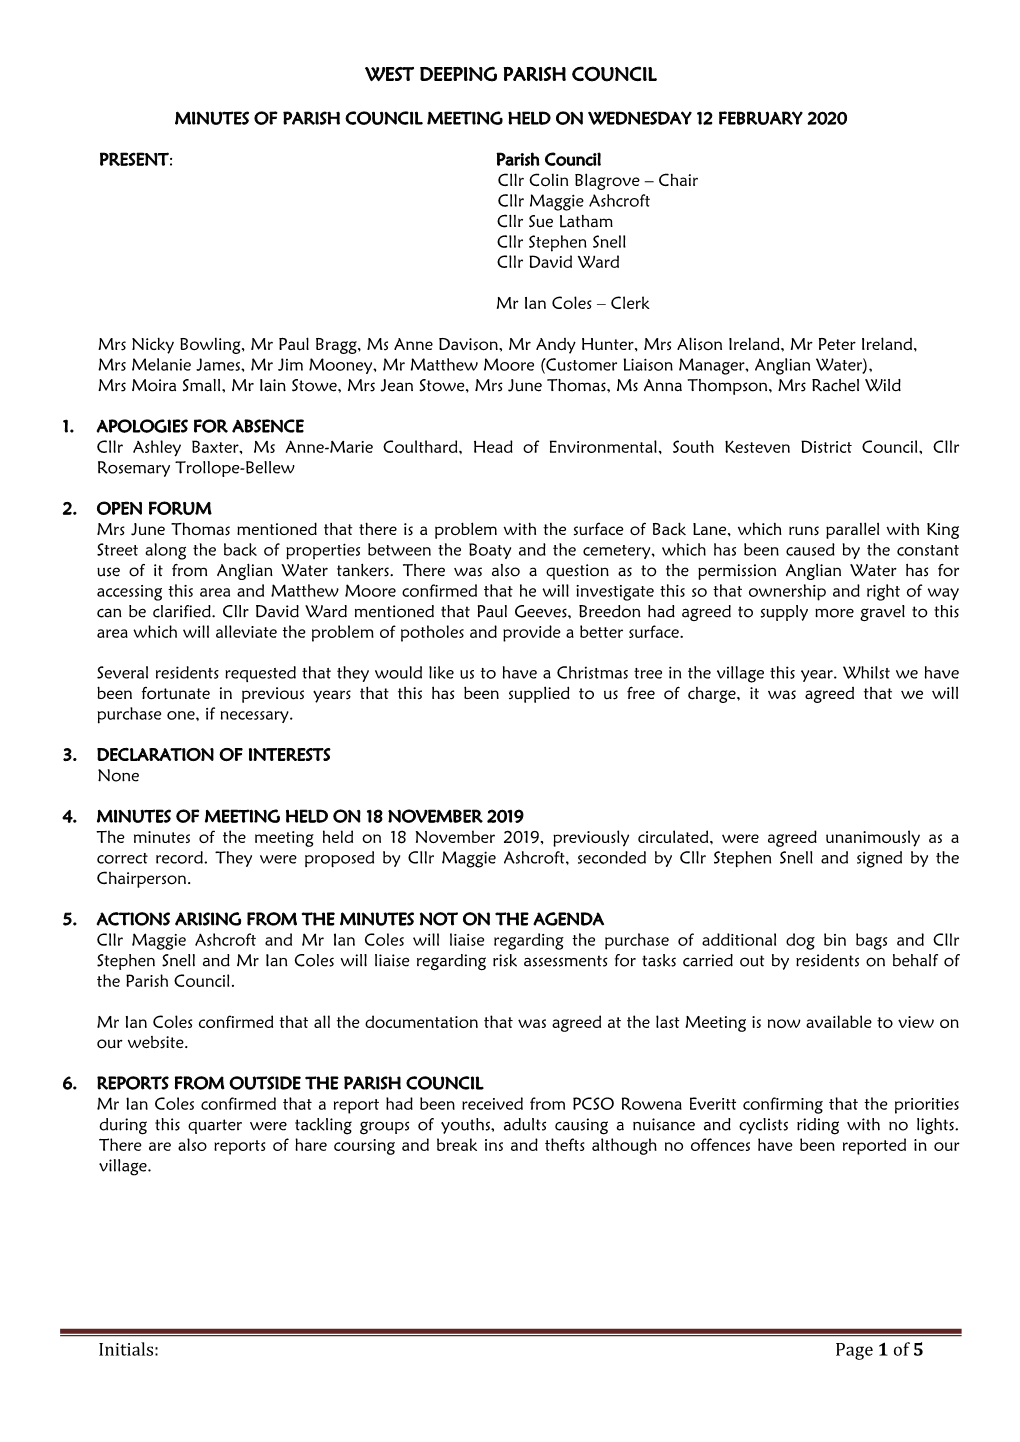 Initials: Page 1 of 5 WEST DEEPING PARISH COUNCIL